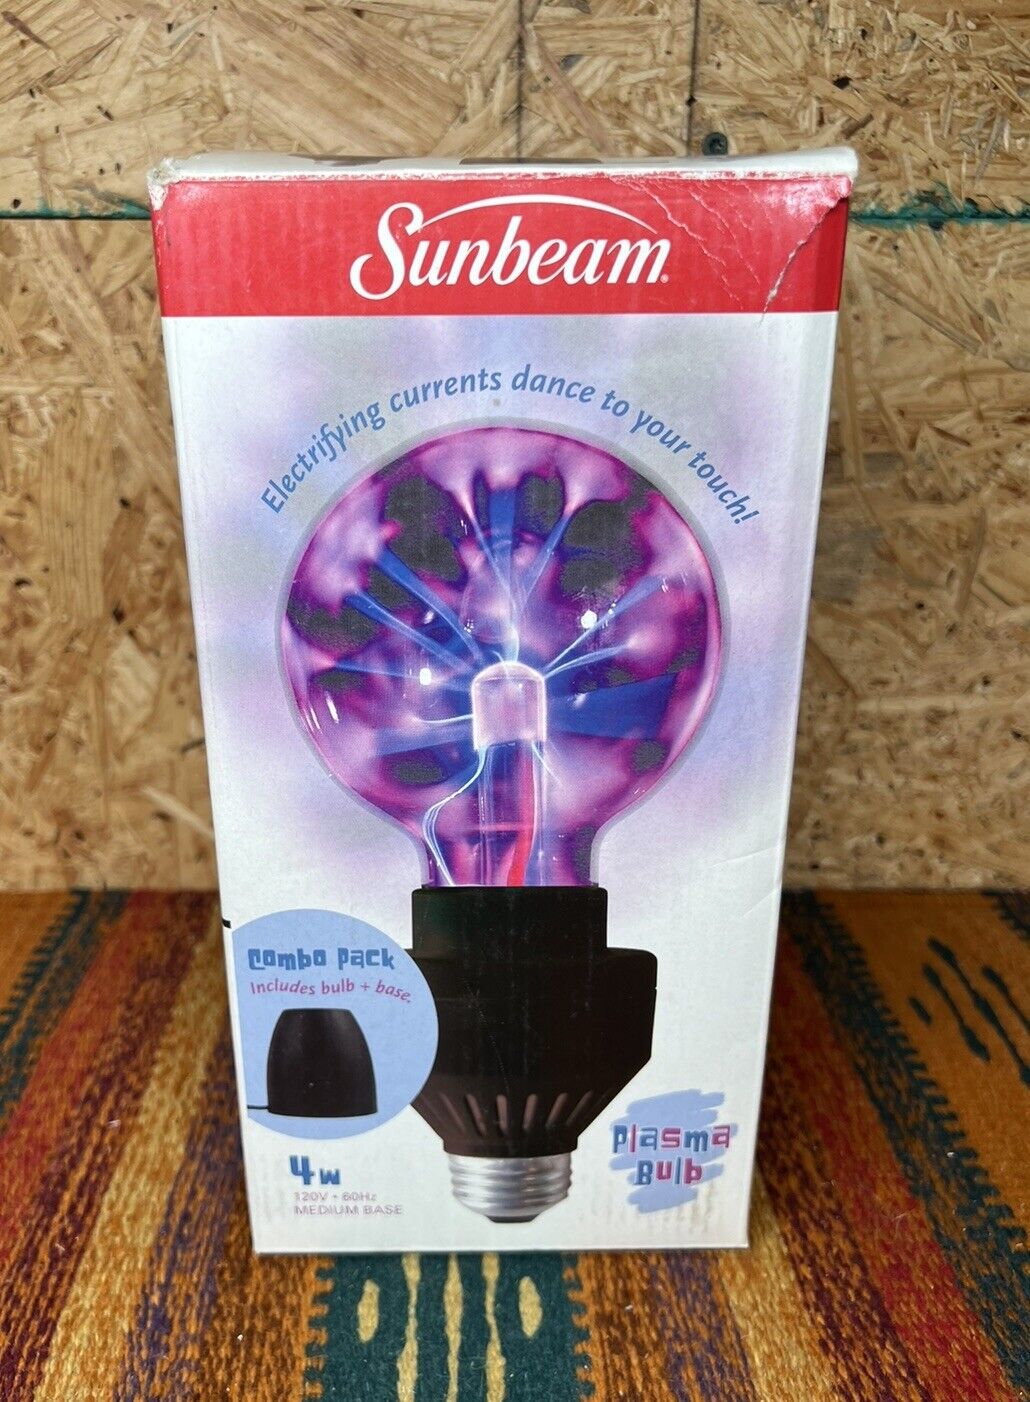 Sunbeam Plasma Bulb With Base Electrifying Currents Dance To Touch 4W